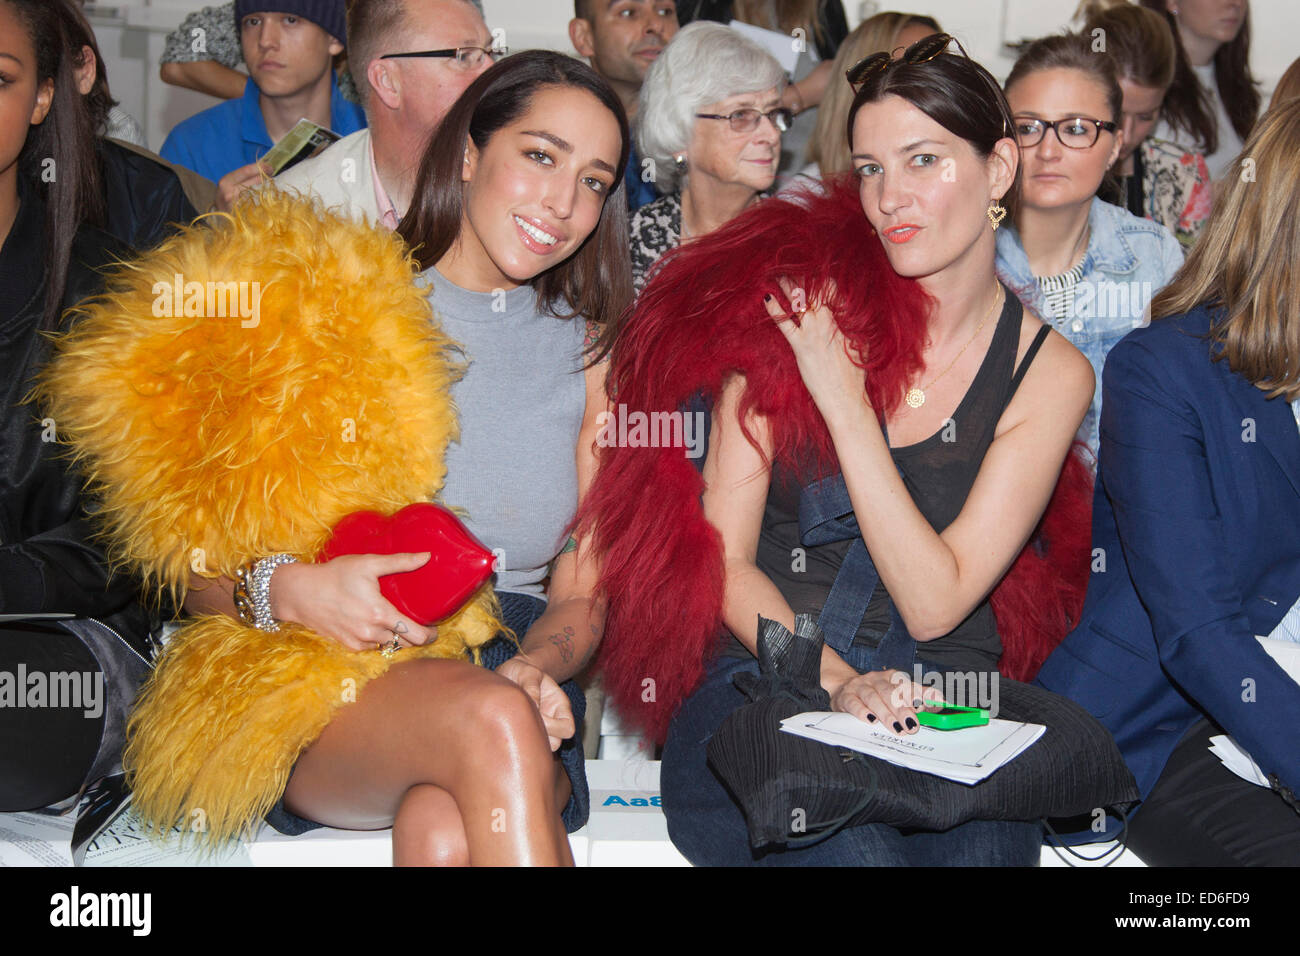 Front row celebrities at London Fashion Week Stock Photo